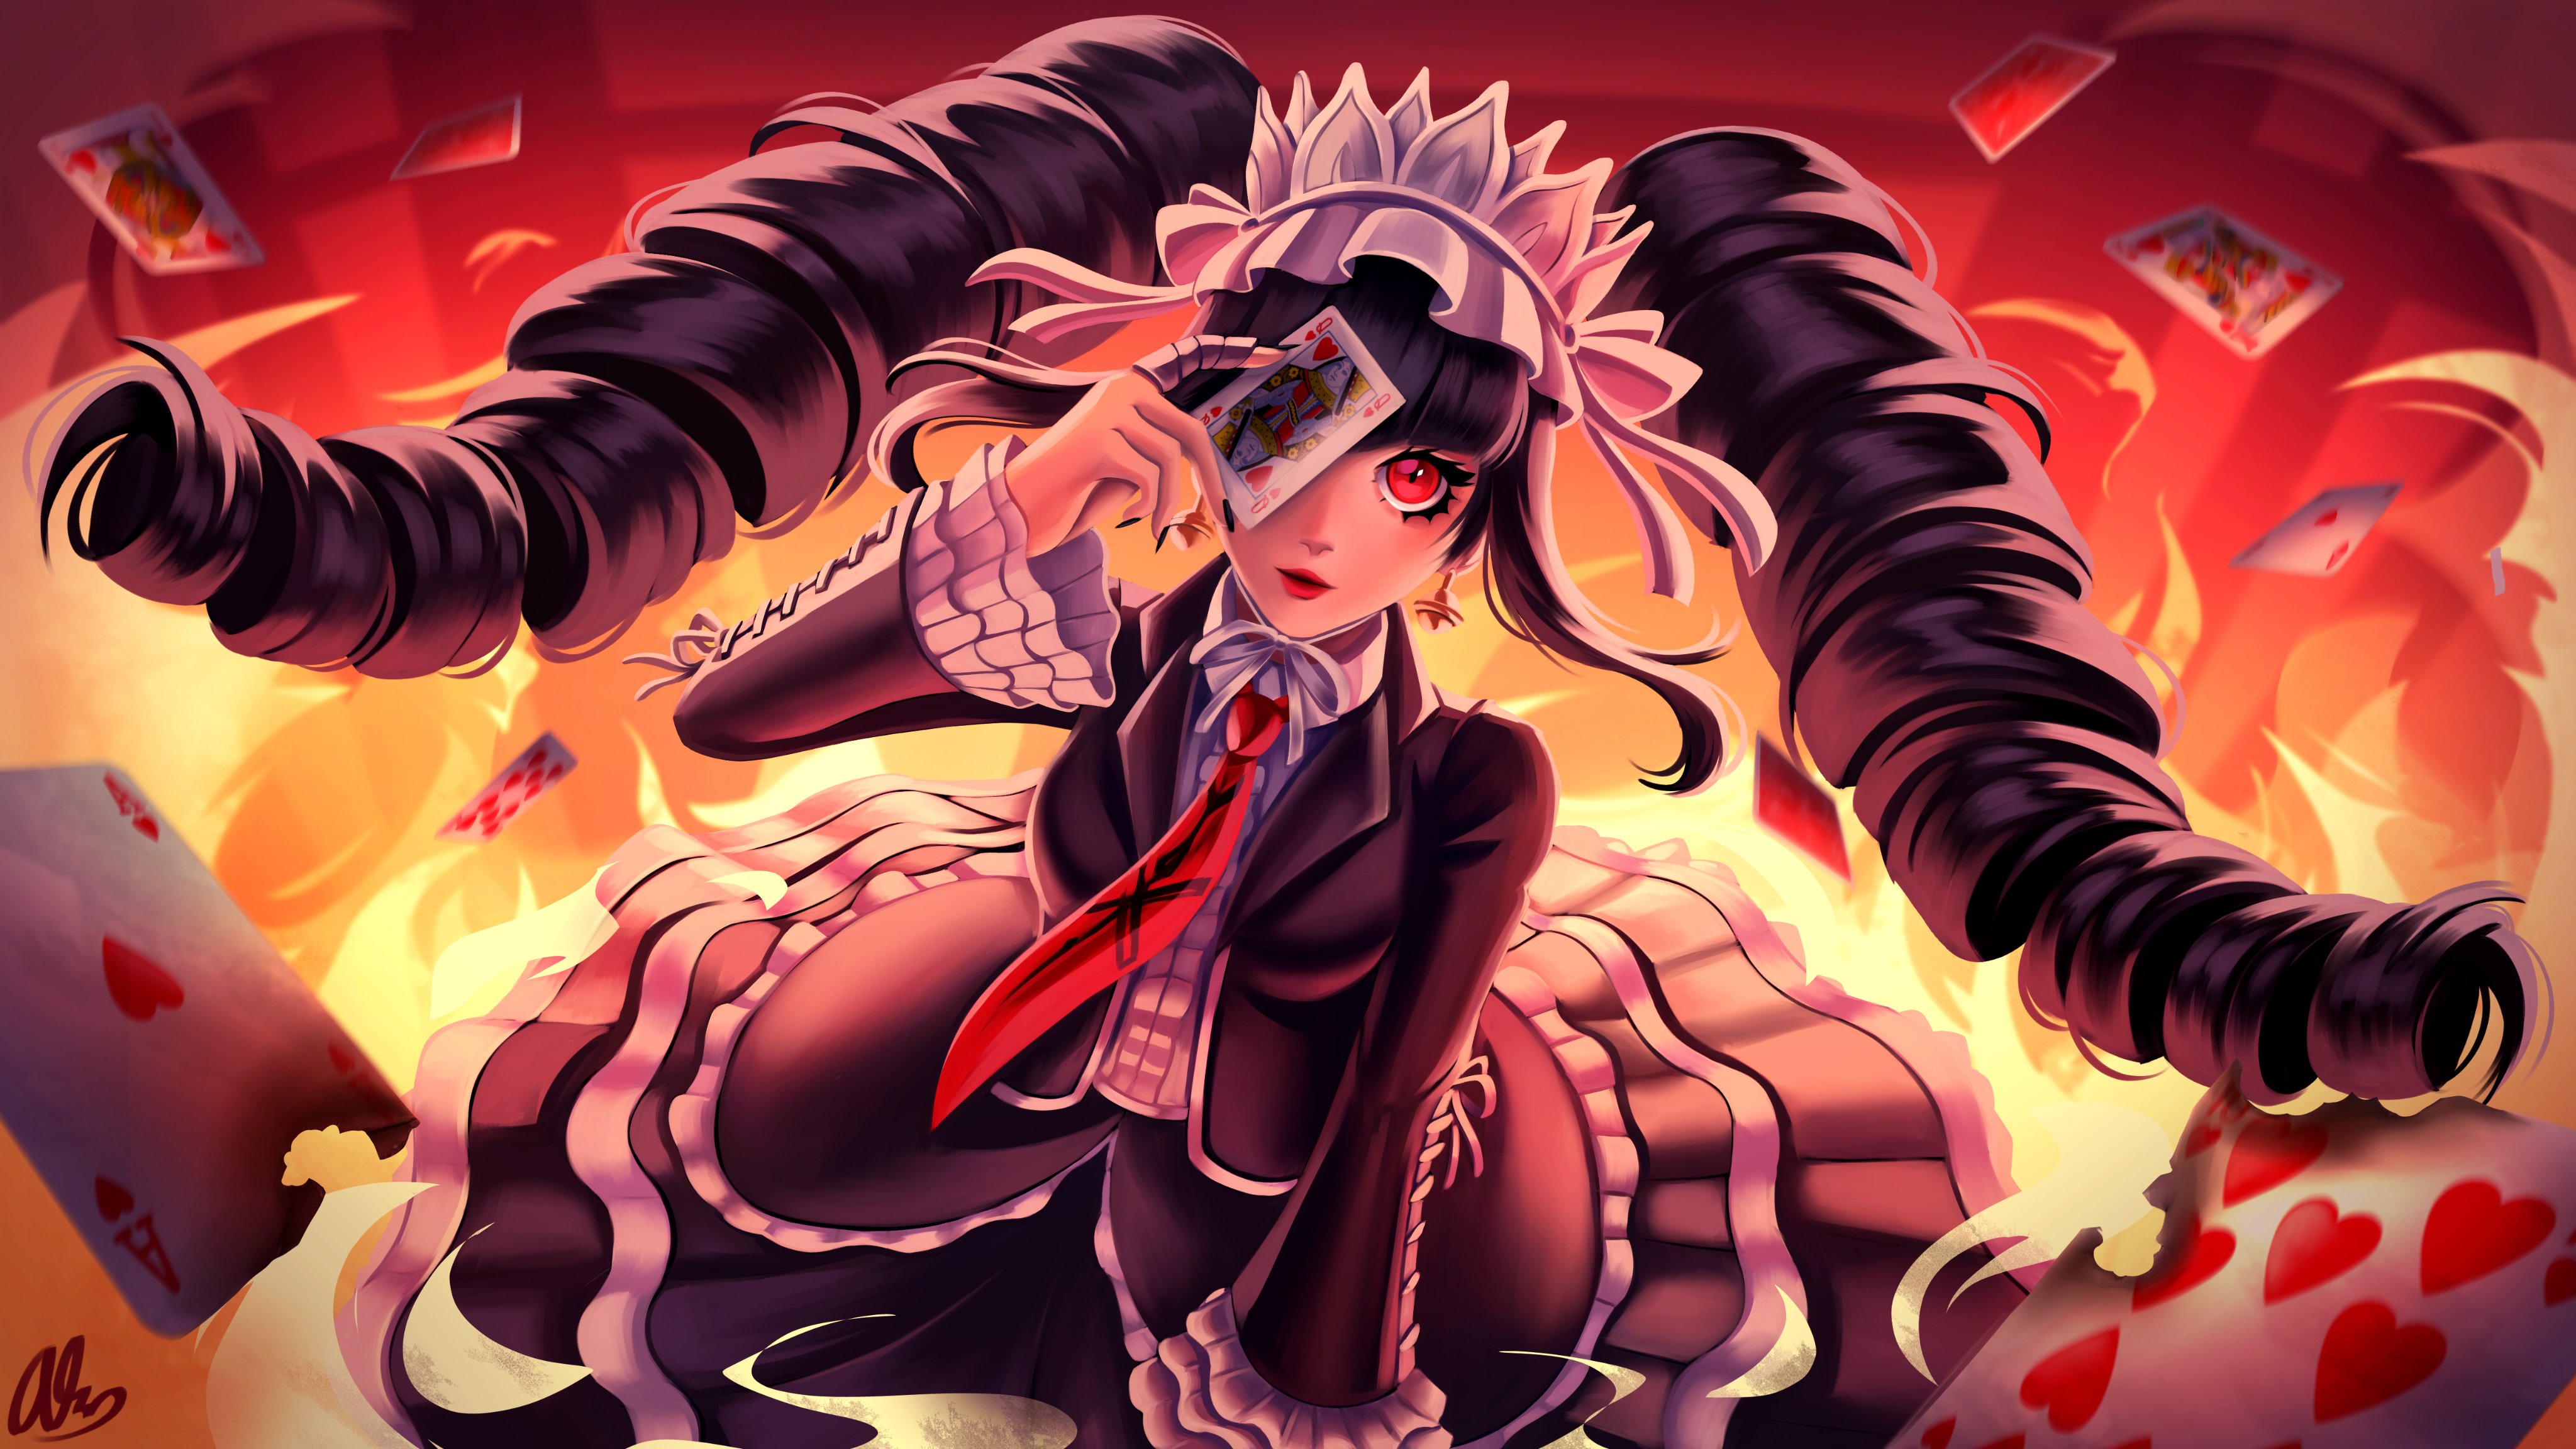 Danganronpa HD Wallpapers and Backgrounds. 